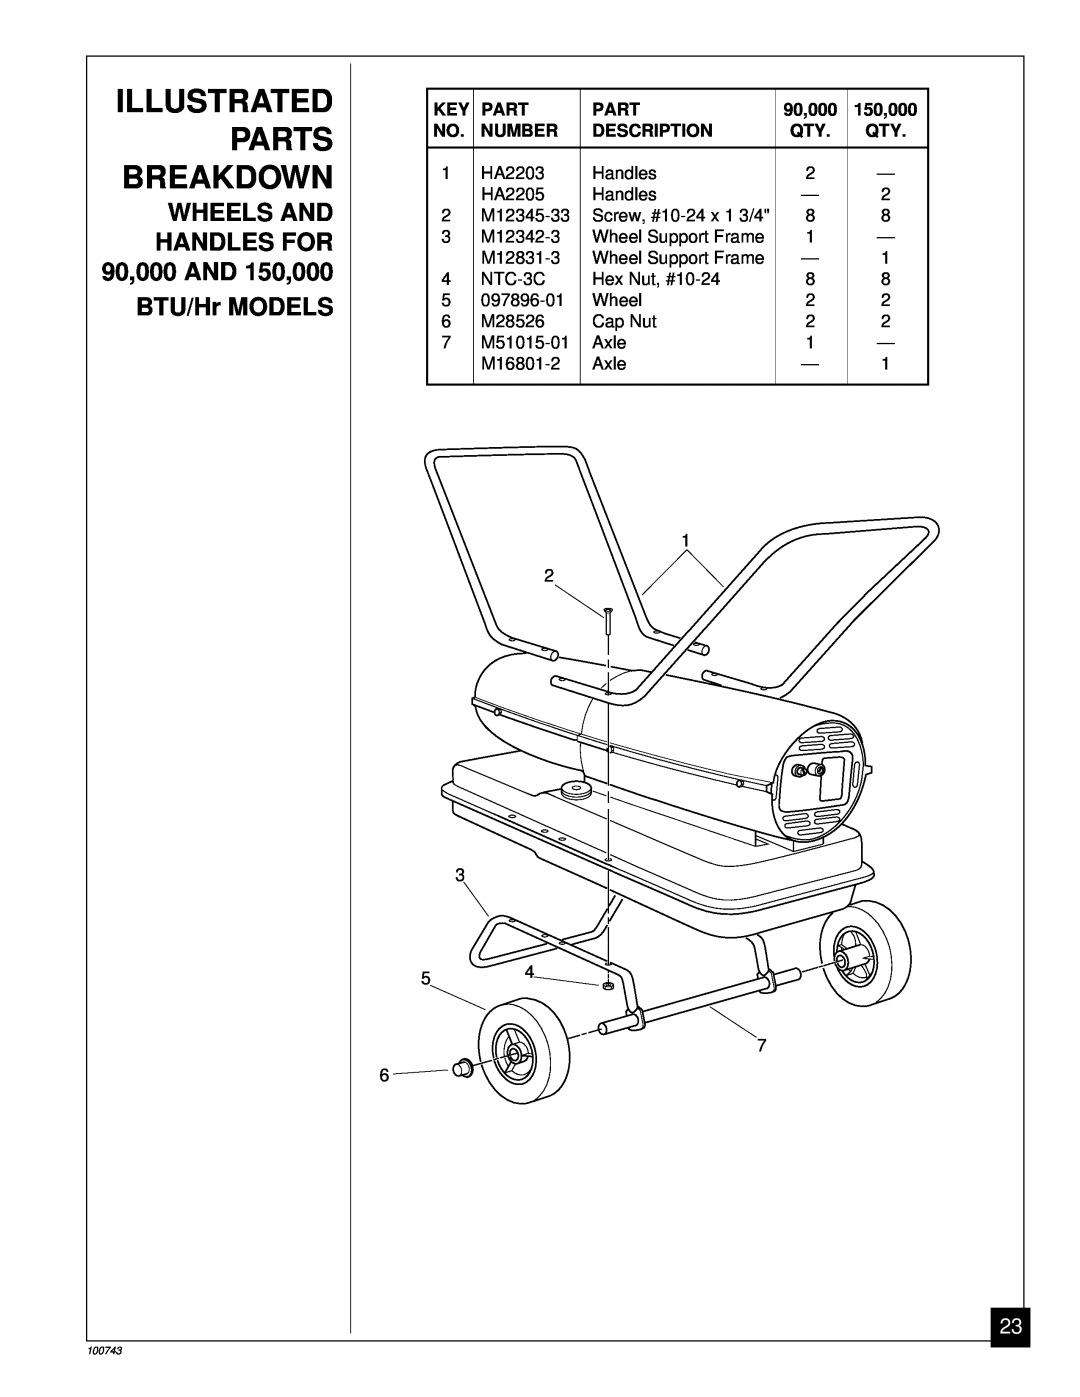 Master Lock B150, B30, B70 Illustrated Parts Breakdown, Wheels And, HANDLES FOR 90,000 AND 150,000 BTU/Hr MODELS, Number 